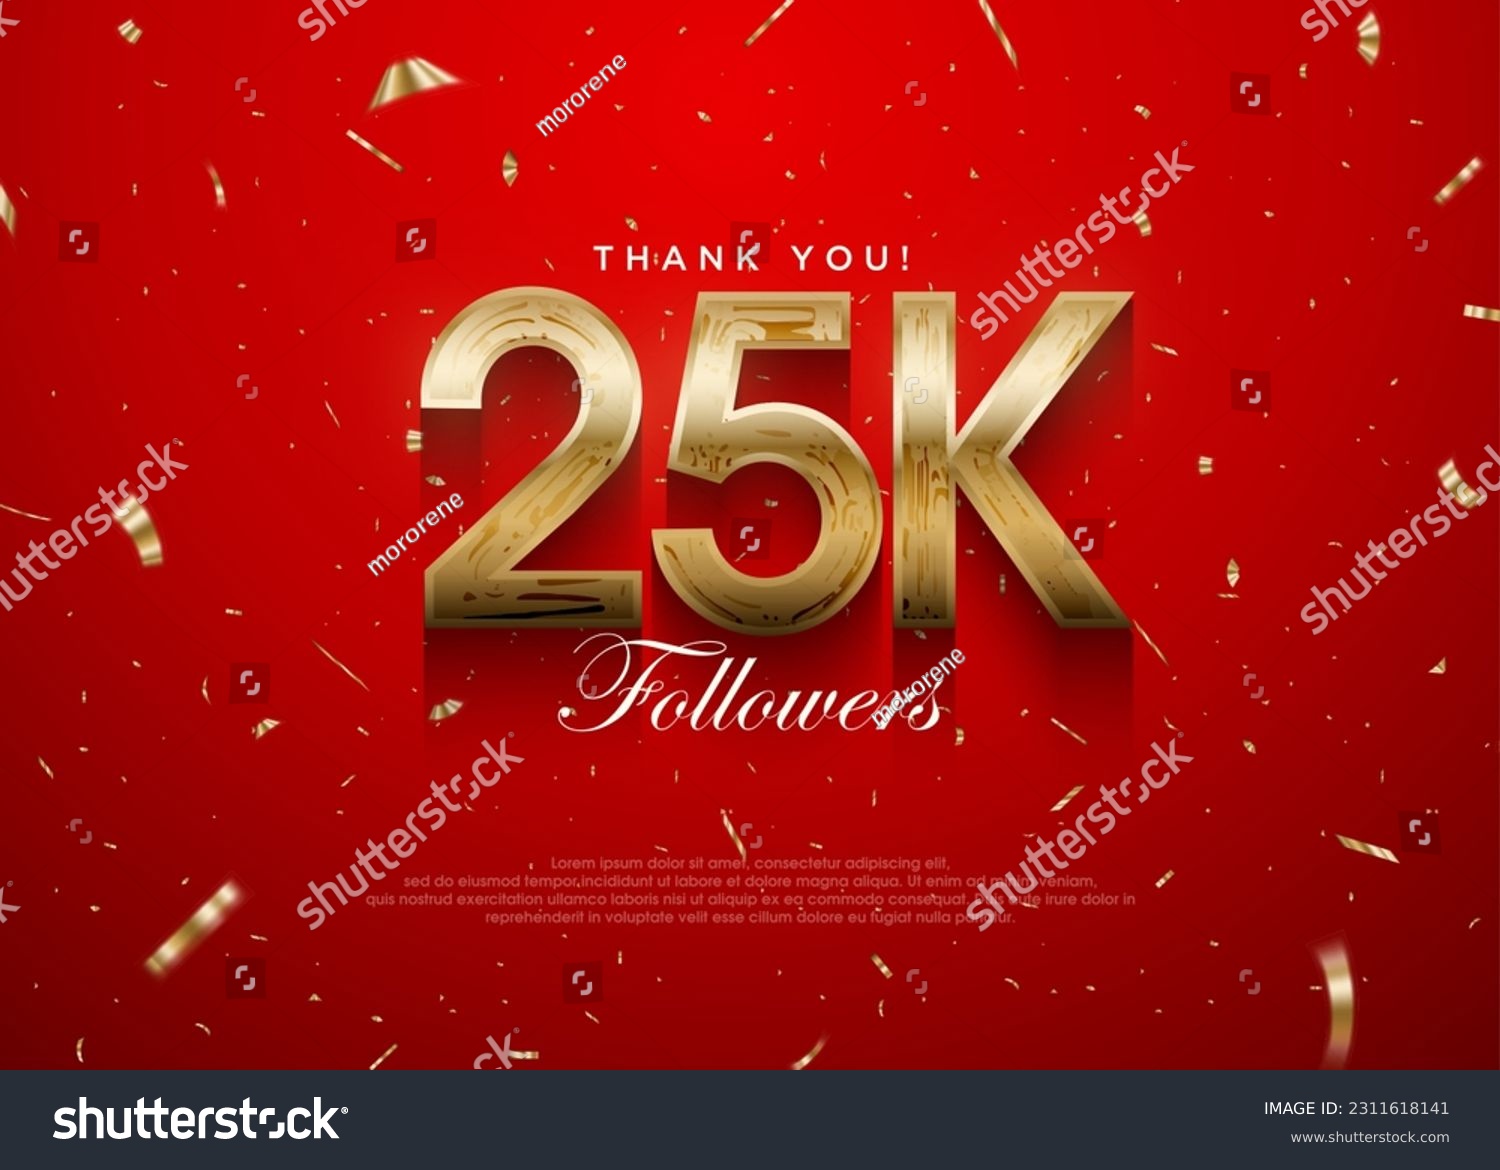 SVG of Thank you followers 25k background, greeting banner poster for fans. svg